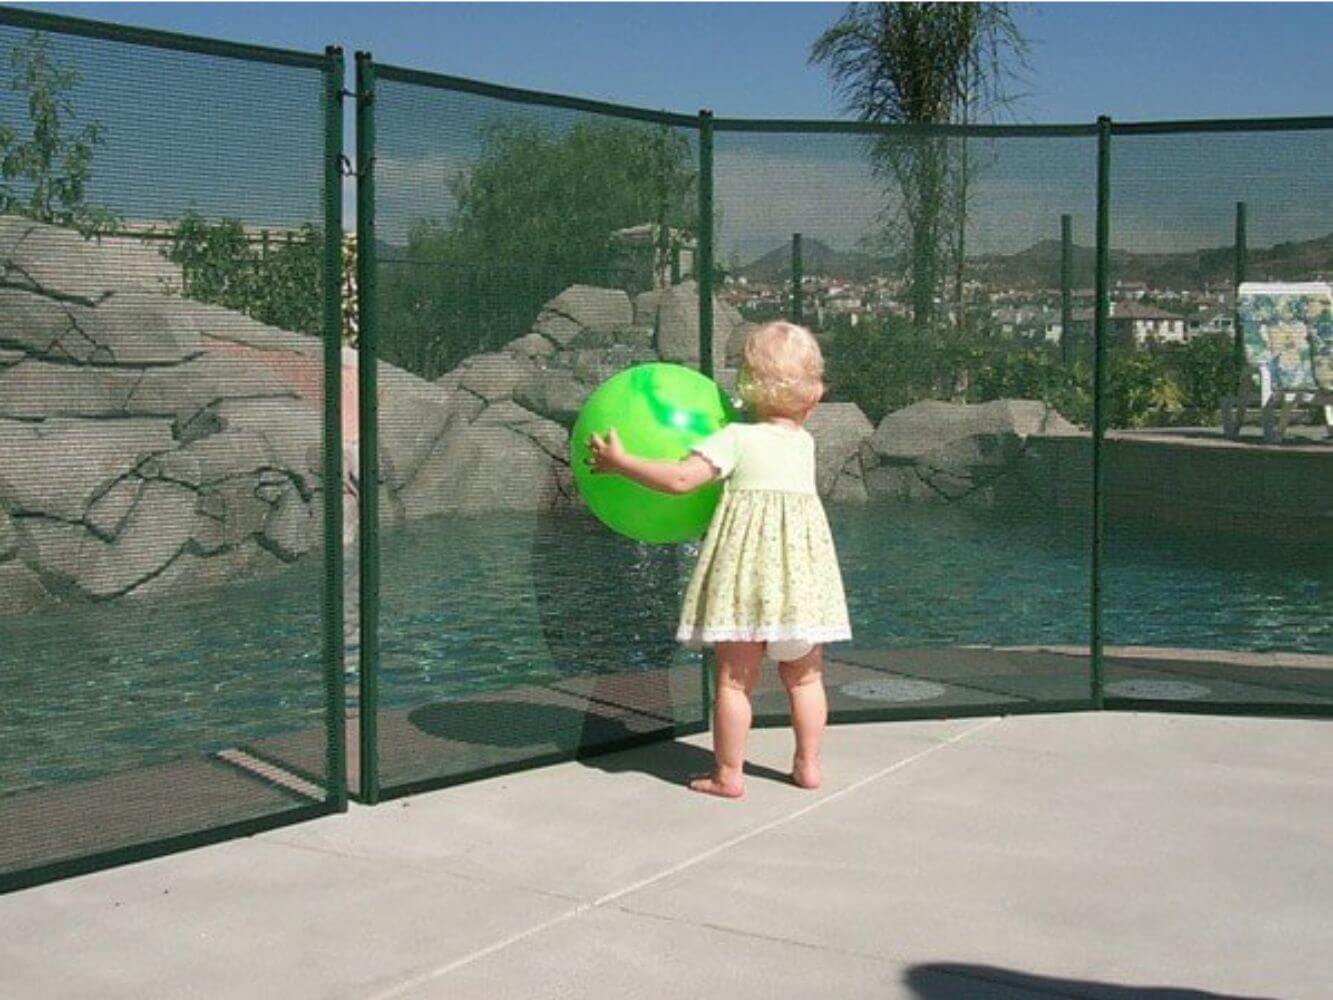 Toddler holding a large ball standing in front of a pool safety fence